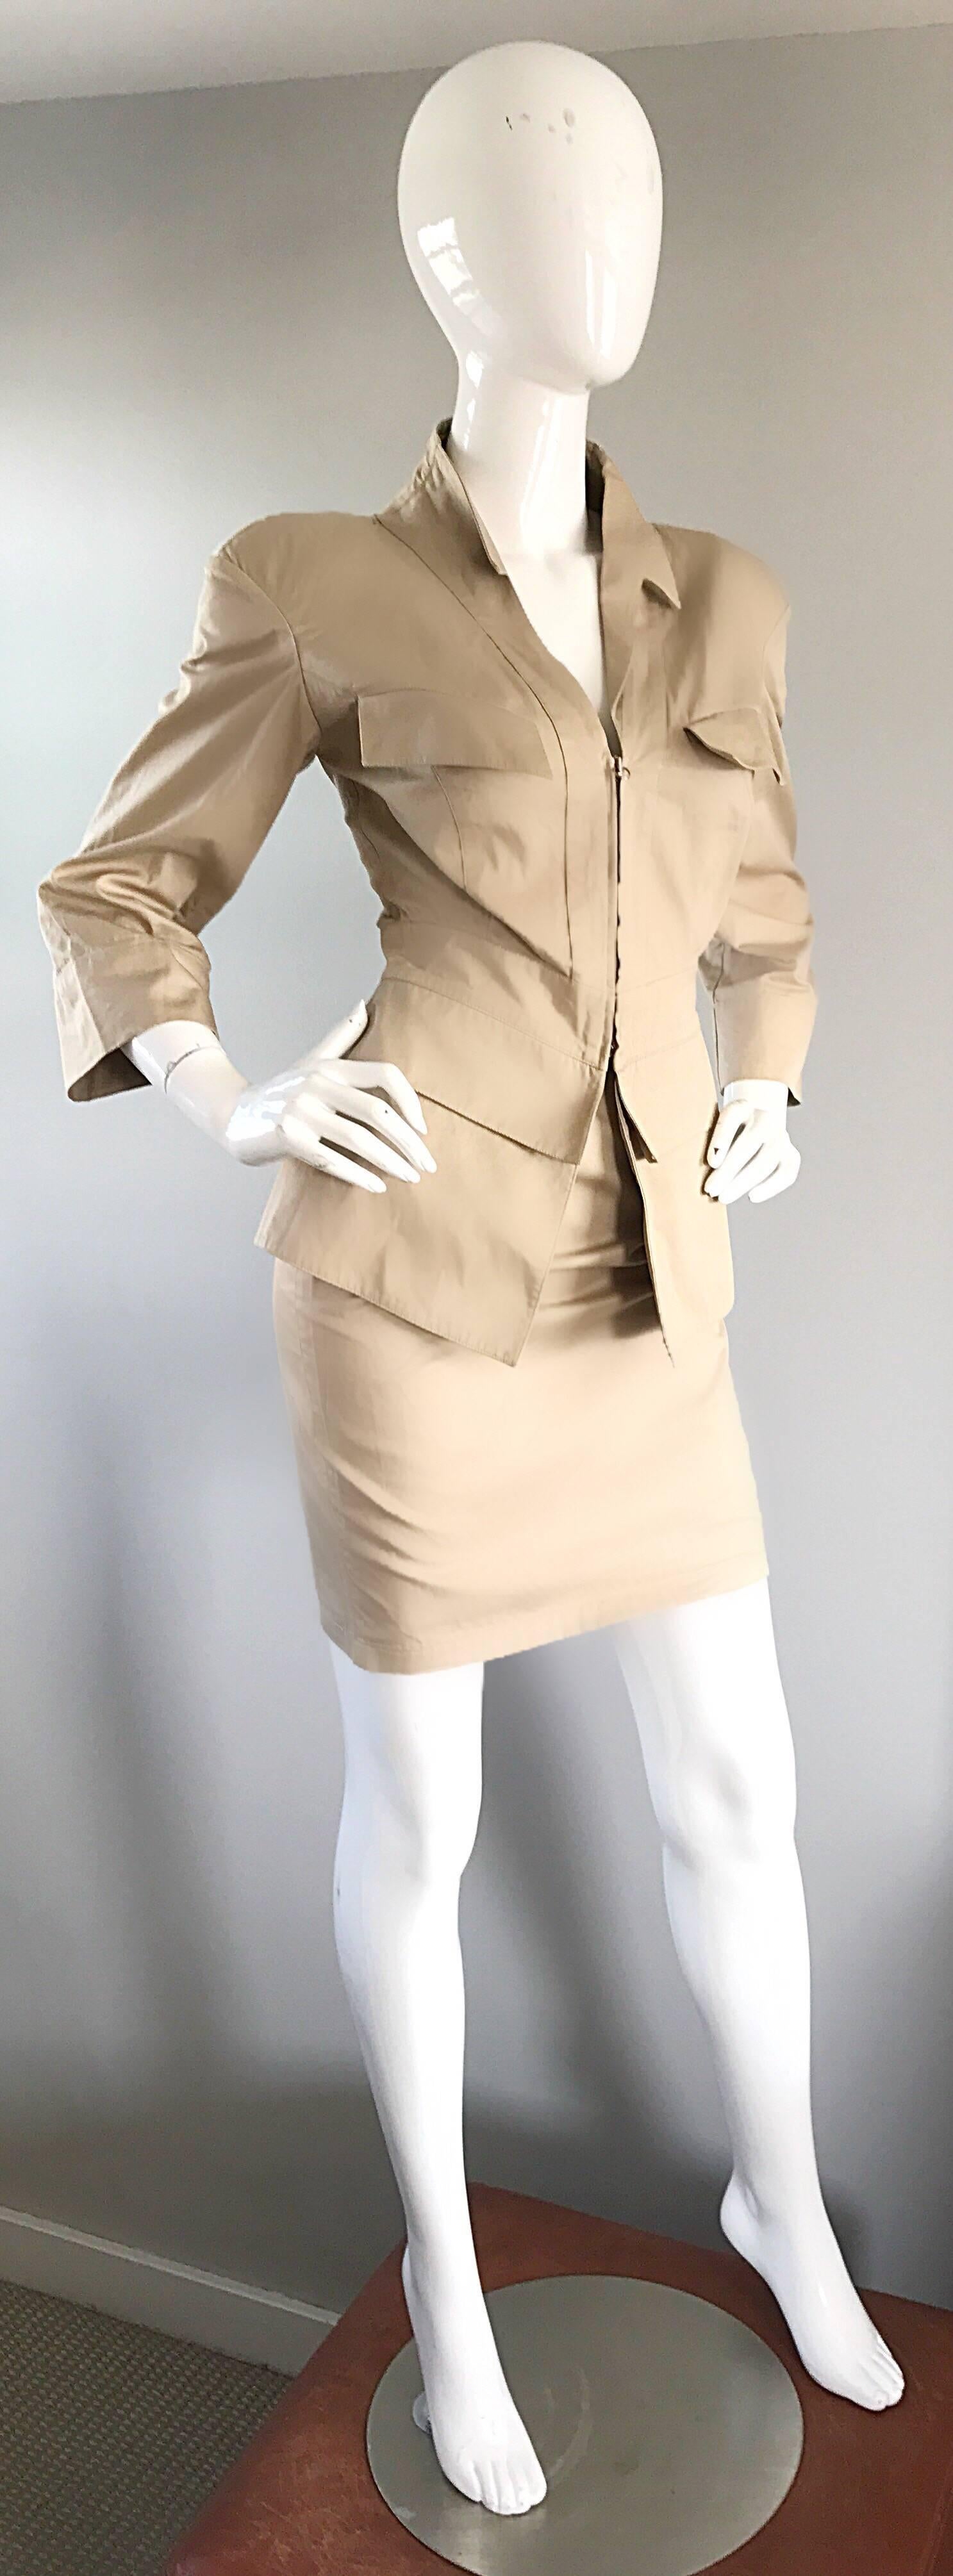 Thierry Mugler 1980s Khaki Safari Two Piece Vintage Bodycon 80s Skirt Suit In Excellent Condition For Sale In San Diego, CA